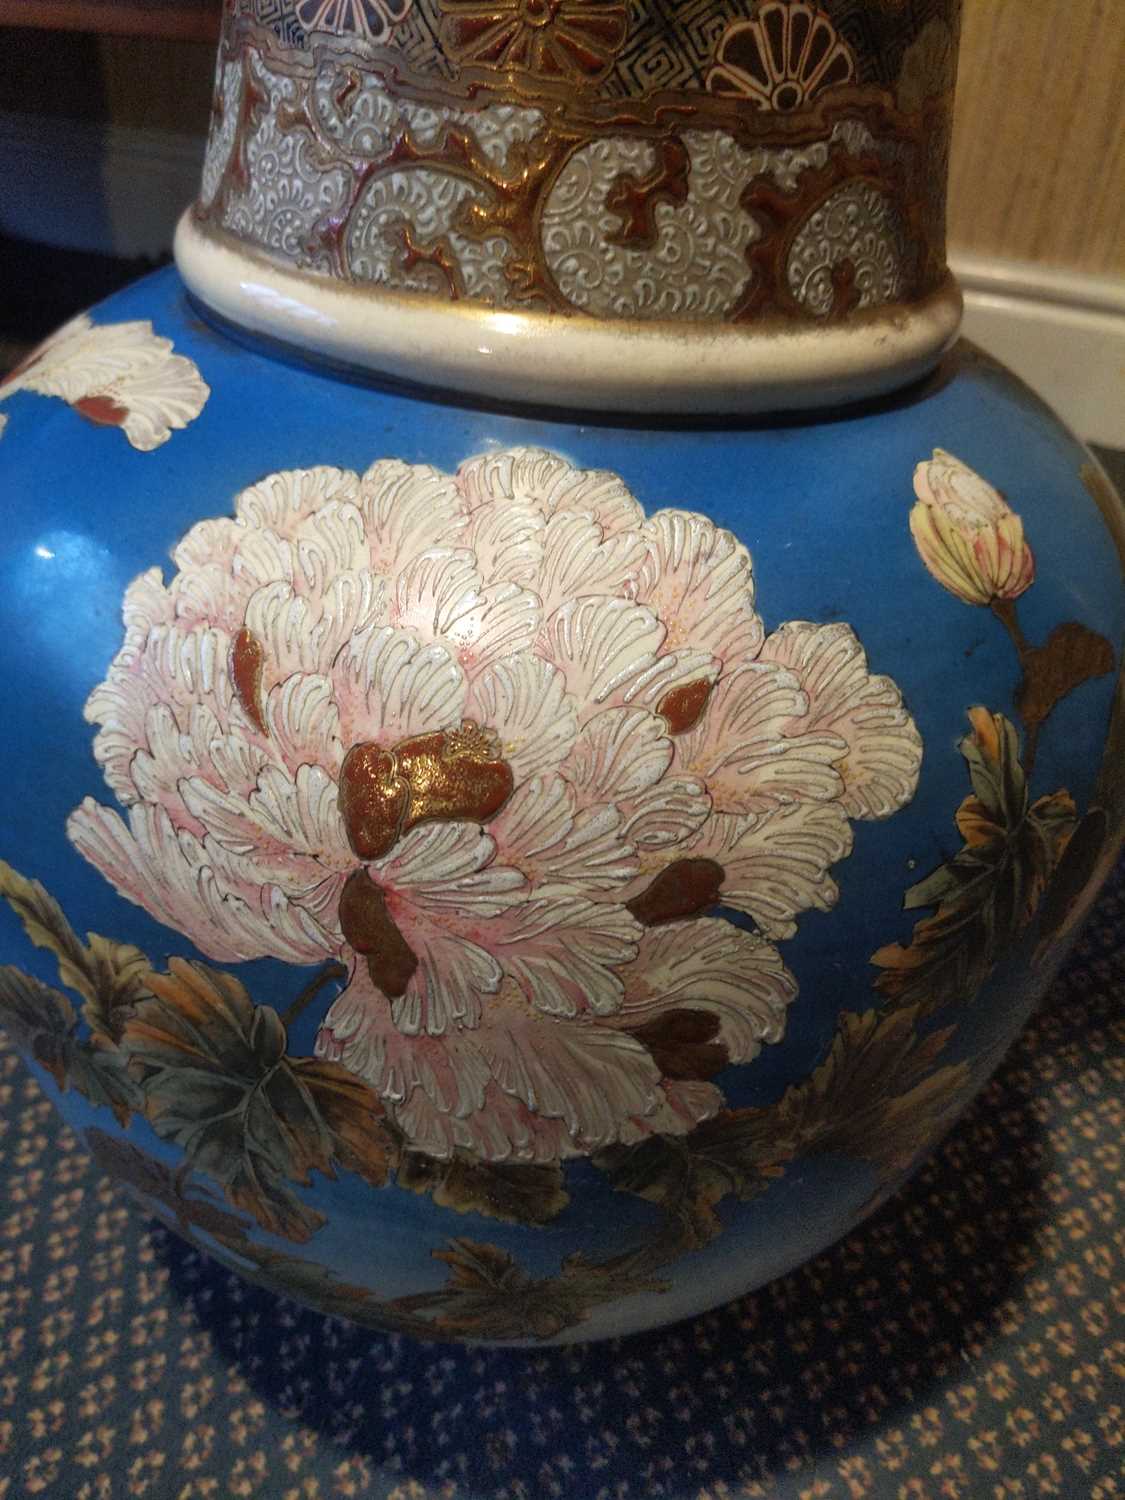 A Japanese Satsuma-Style Earthenware Vase, circa 1900, the trumpet neck with foliage on a brocade - Image 5 of 7